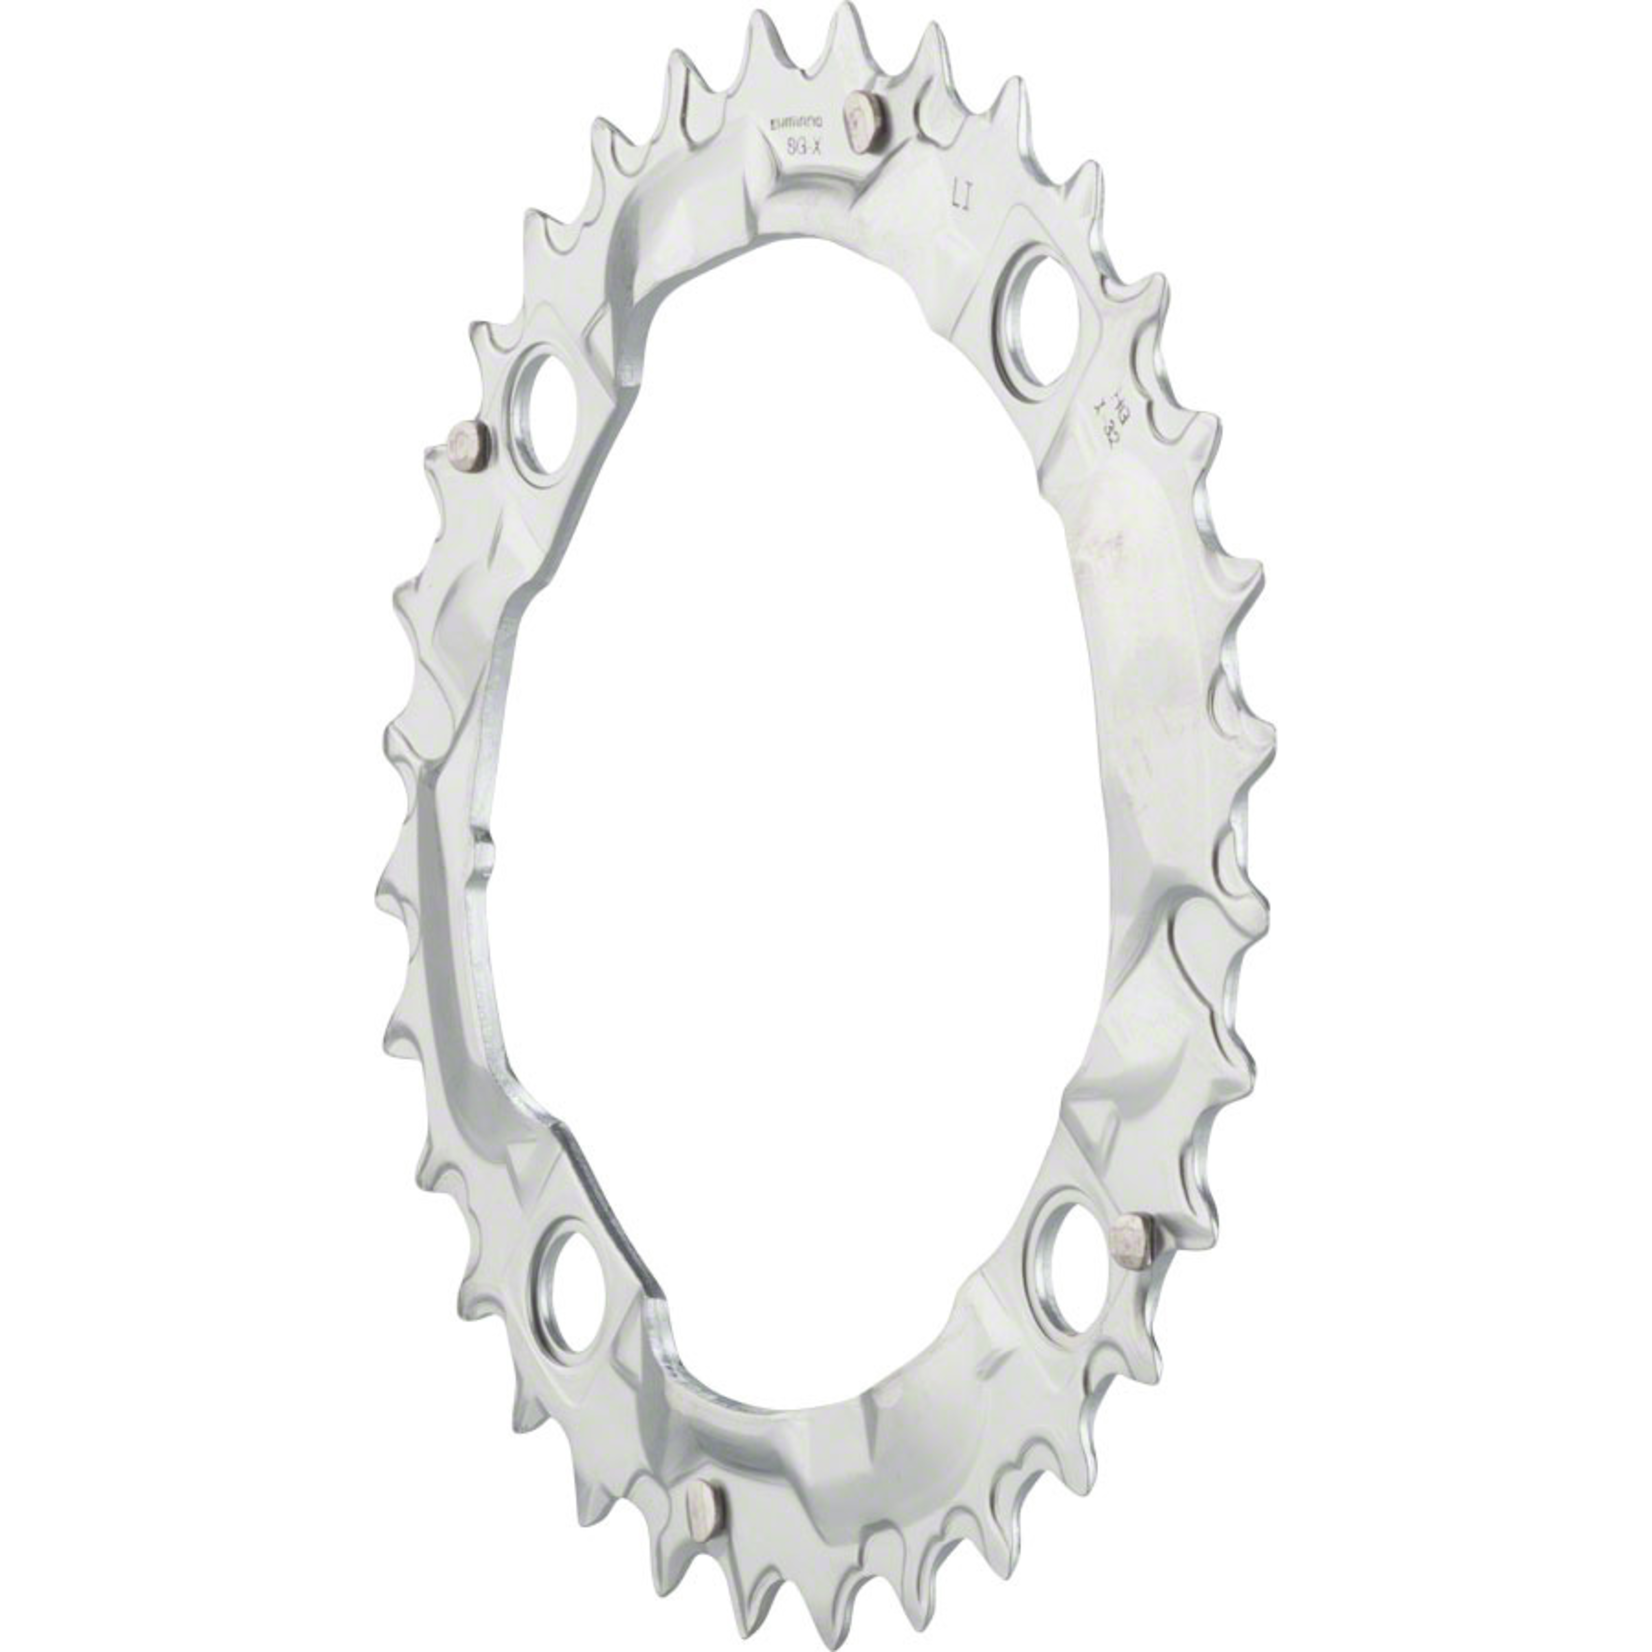 Shimano Alivio M415 32t 104mm 7/8-Speed Middle Chainring Silver